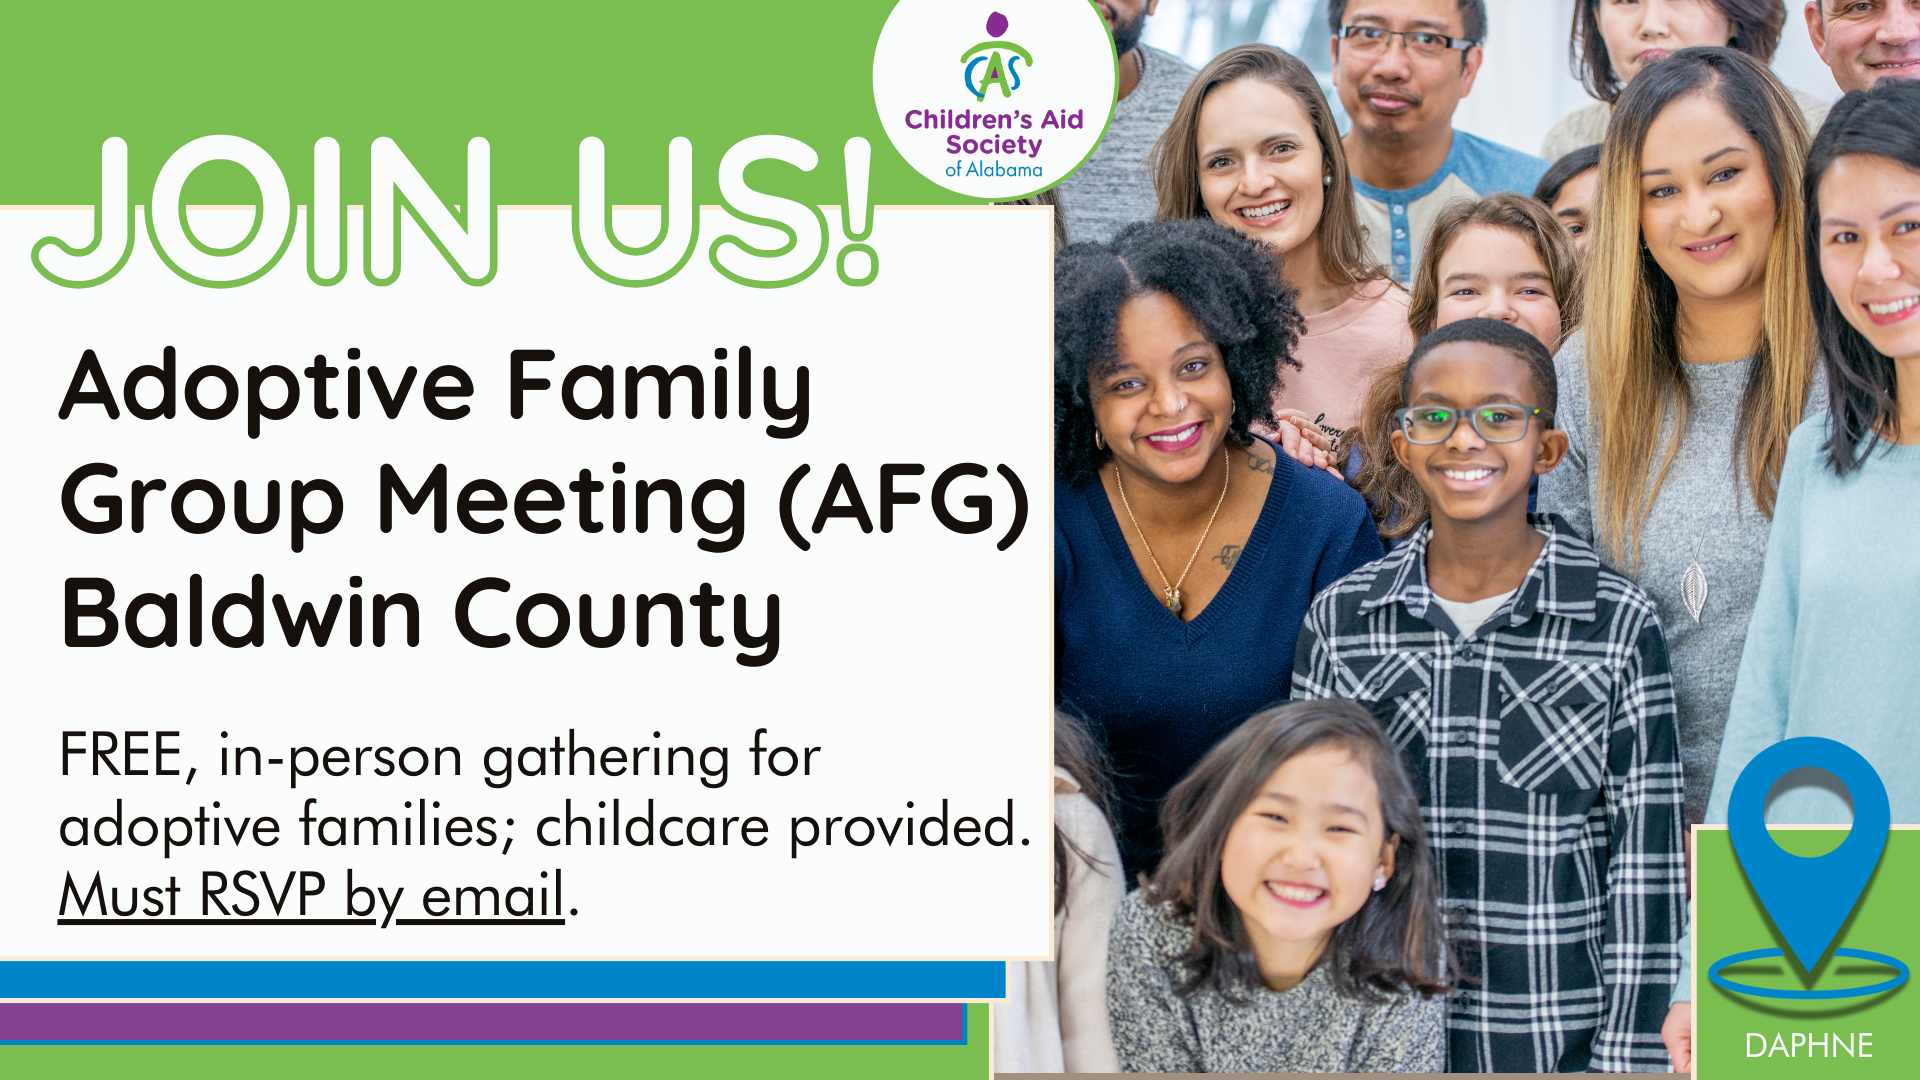 Children's Aid Society of Alabama offers FREE support groups that meet throughout the state, providing education and social interaction for adoptive parents and their children. Childcare is provided, the Baldwin County group meets in Daphne, AL.